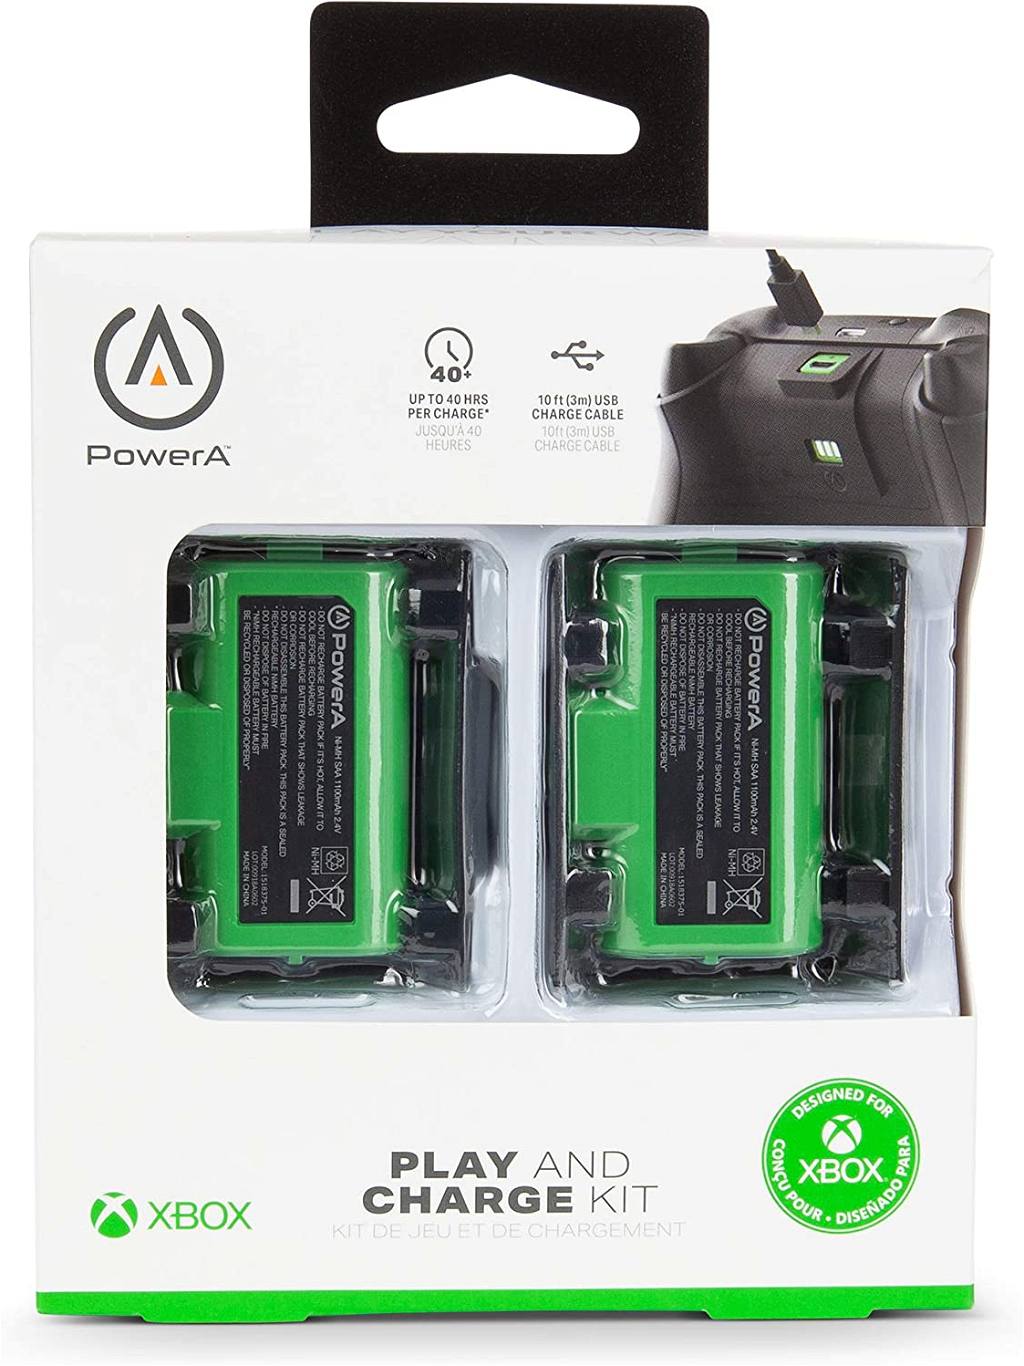 Play Charge Kit for Xbox One / Xbox Series X|S for Xbox One, Xbox Series Series S